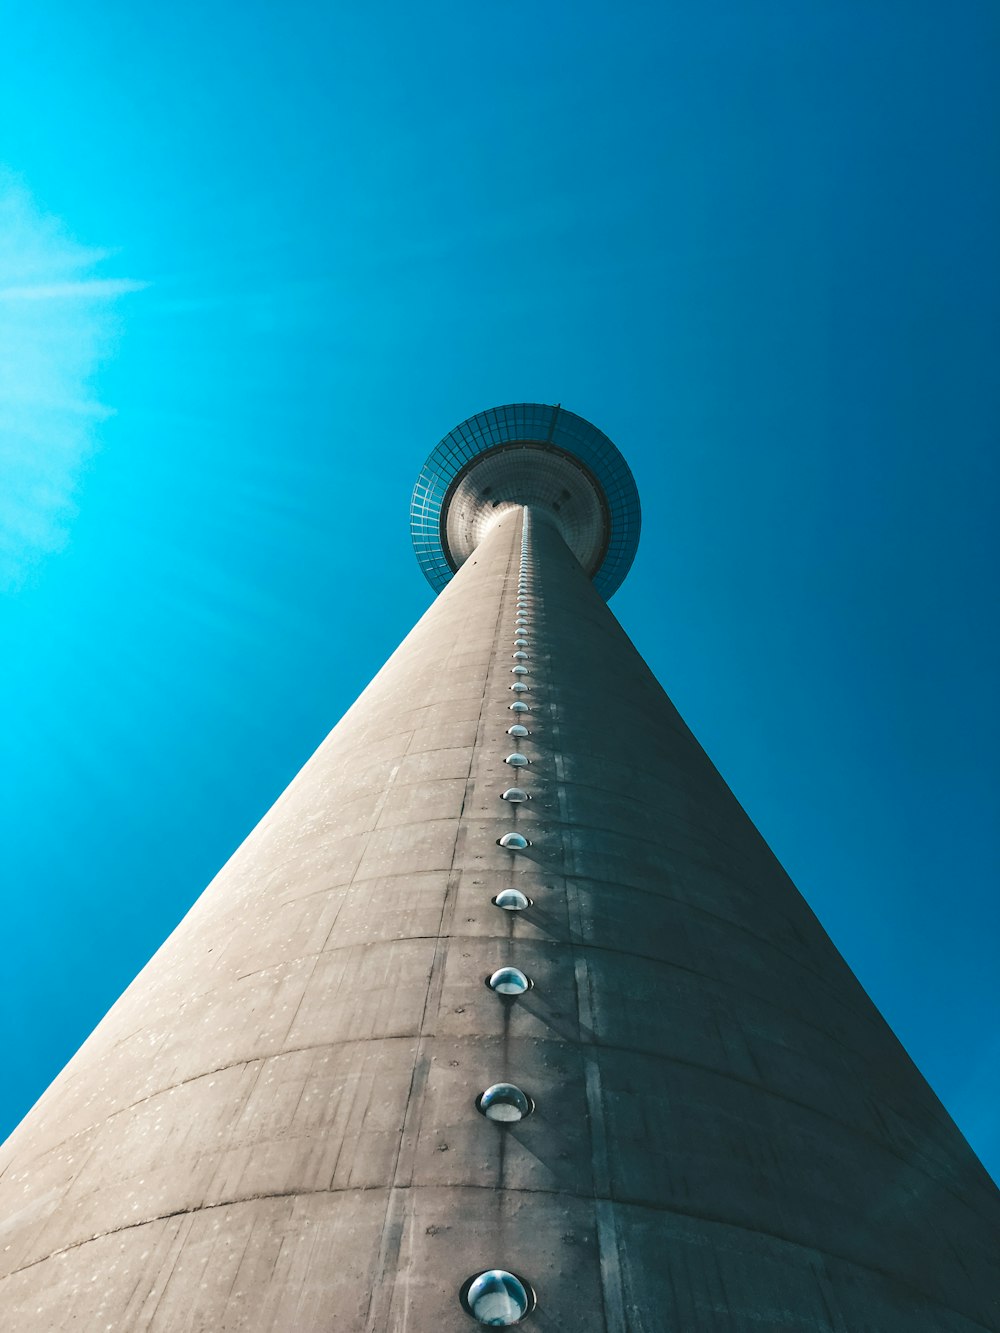 low angle photography of gray concrete tower under blue sky during daytime